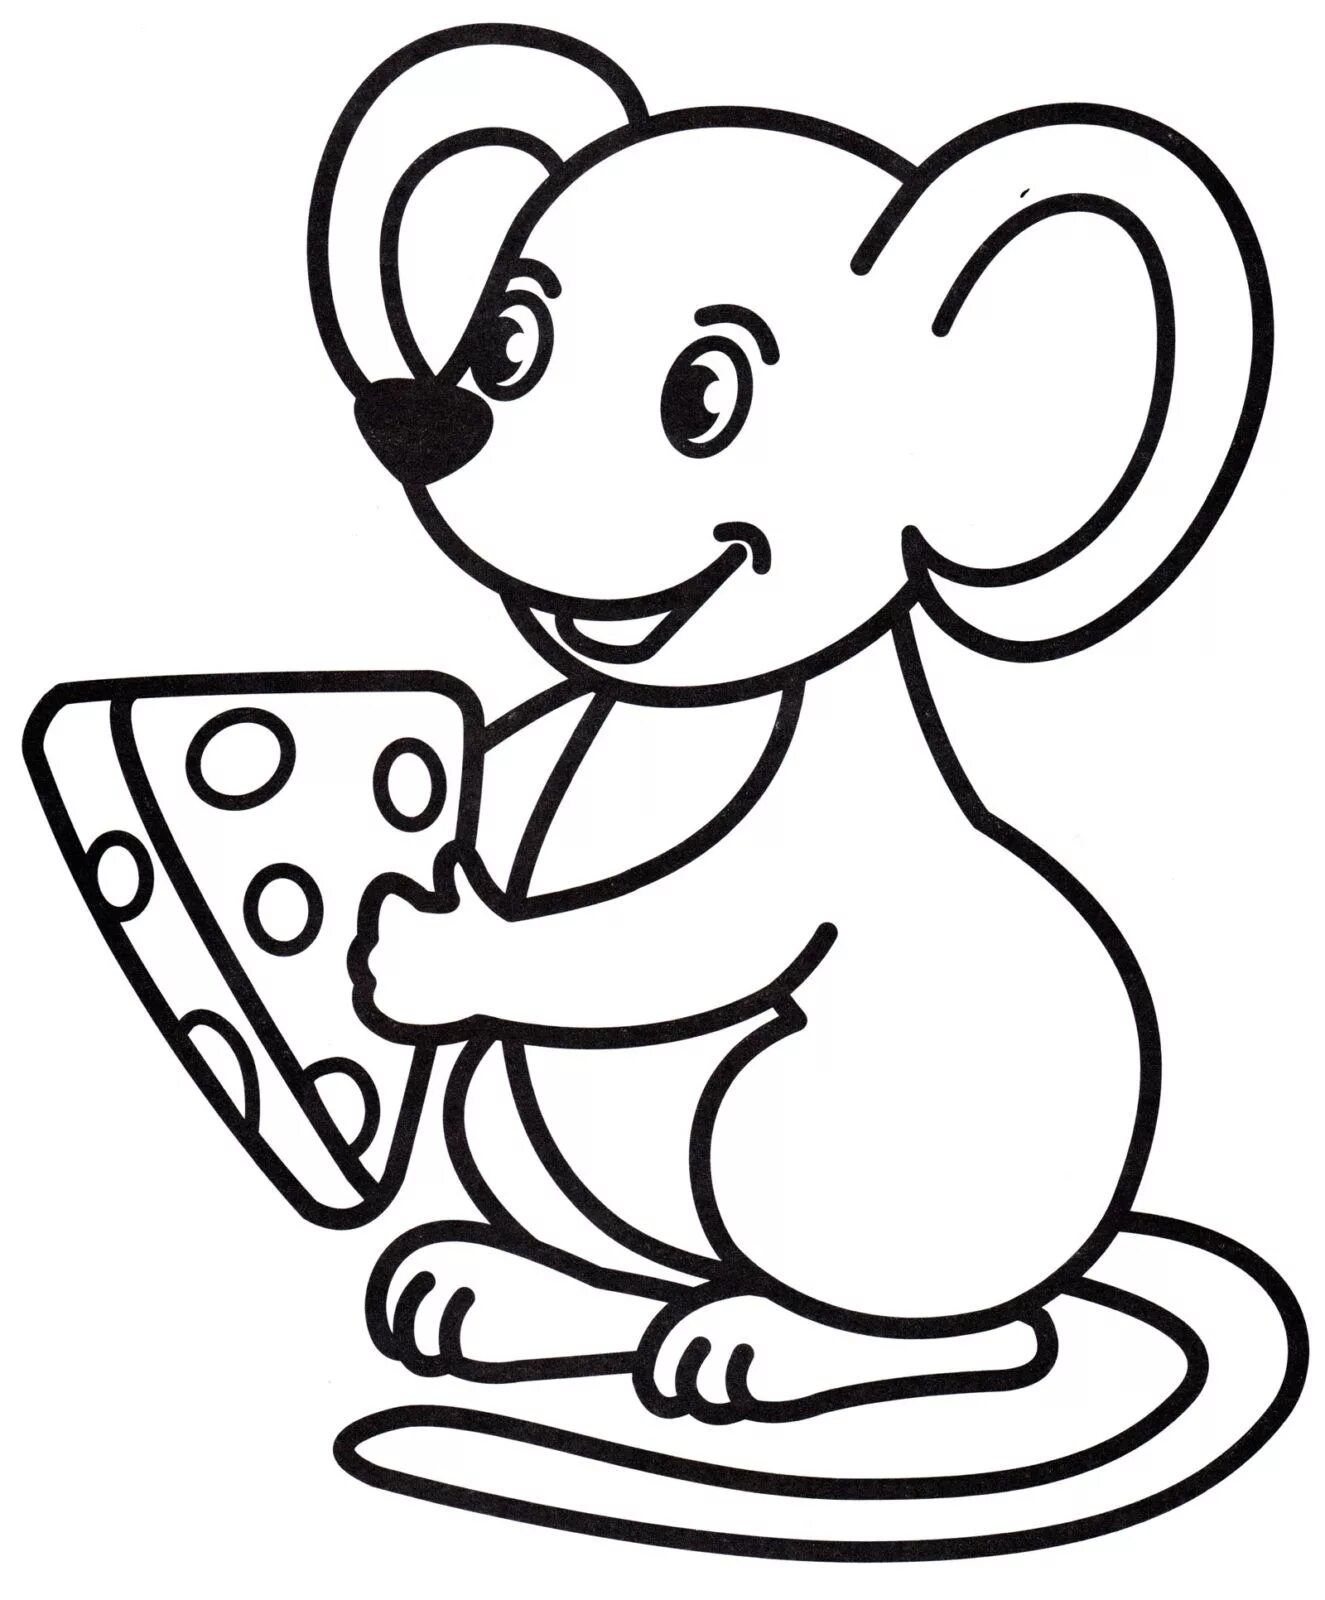 Drawing mouse #3